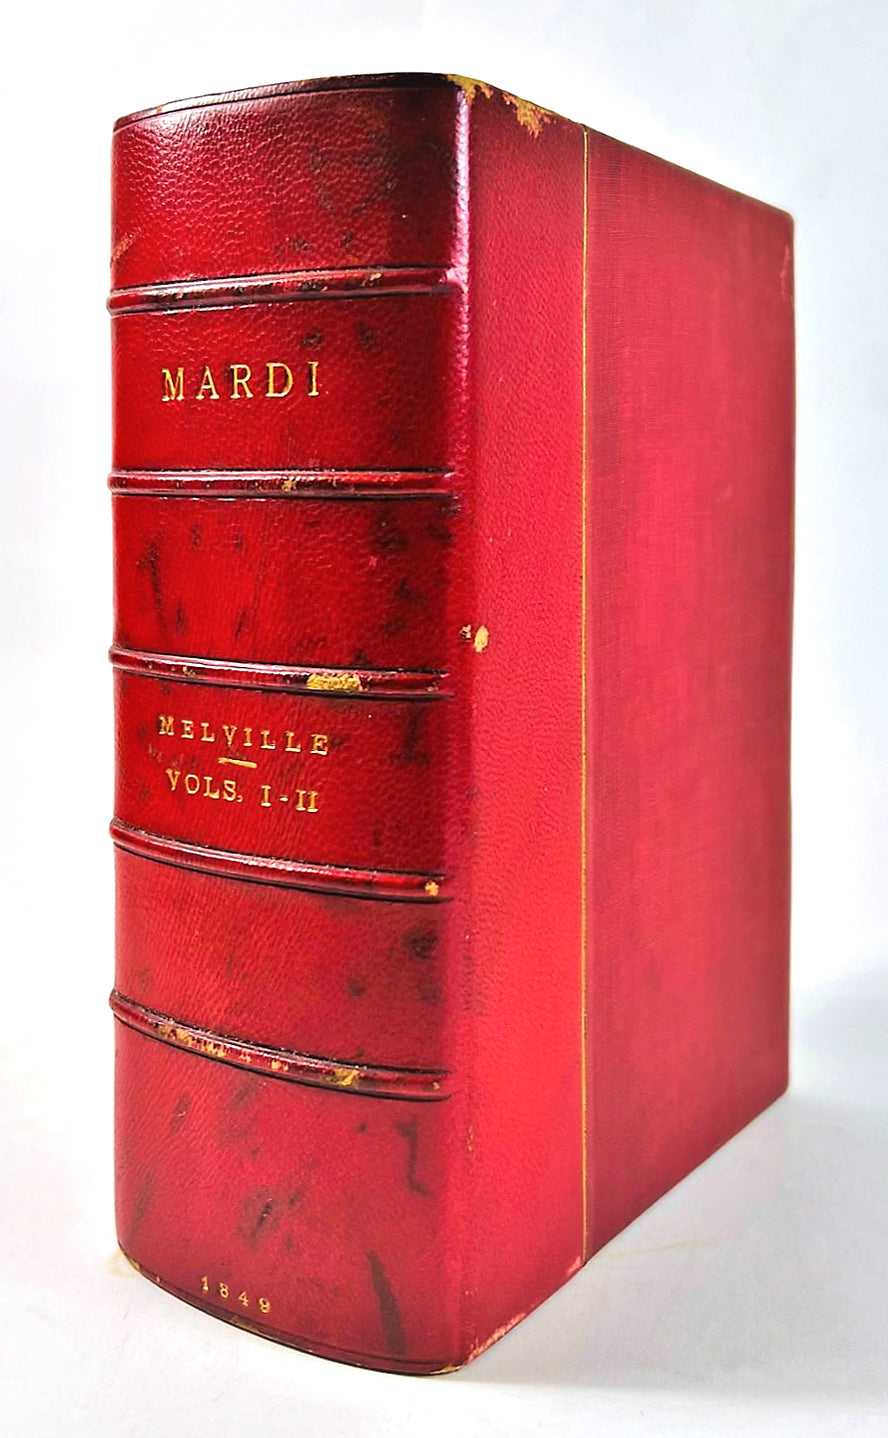 First Edition of Herman Melville's classic, Mardi